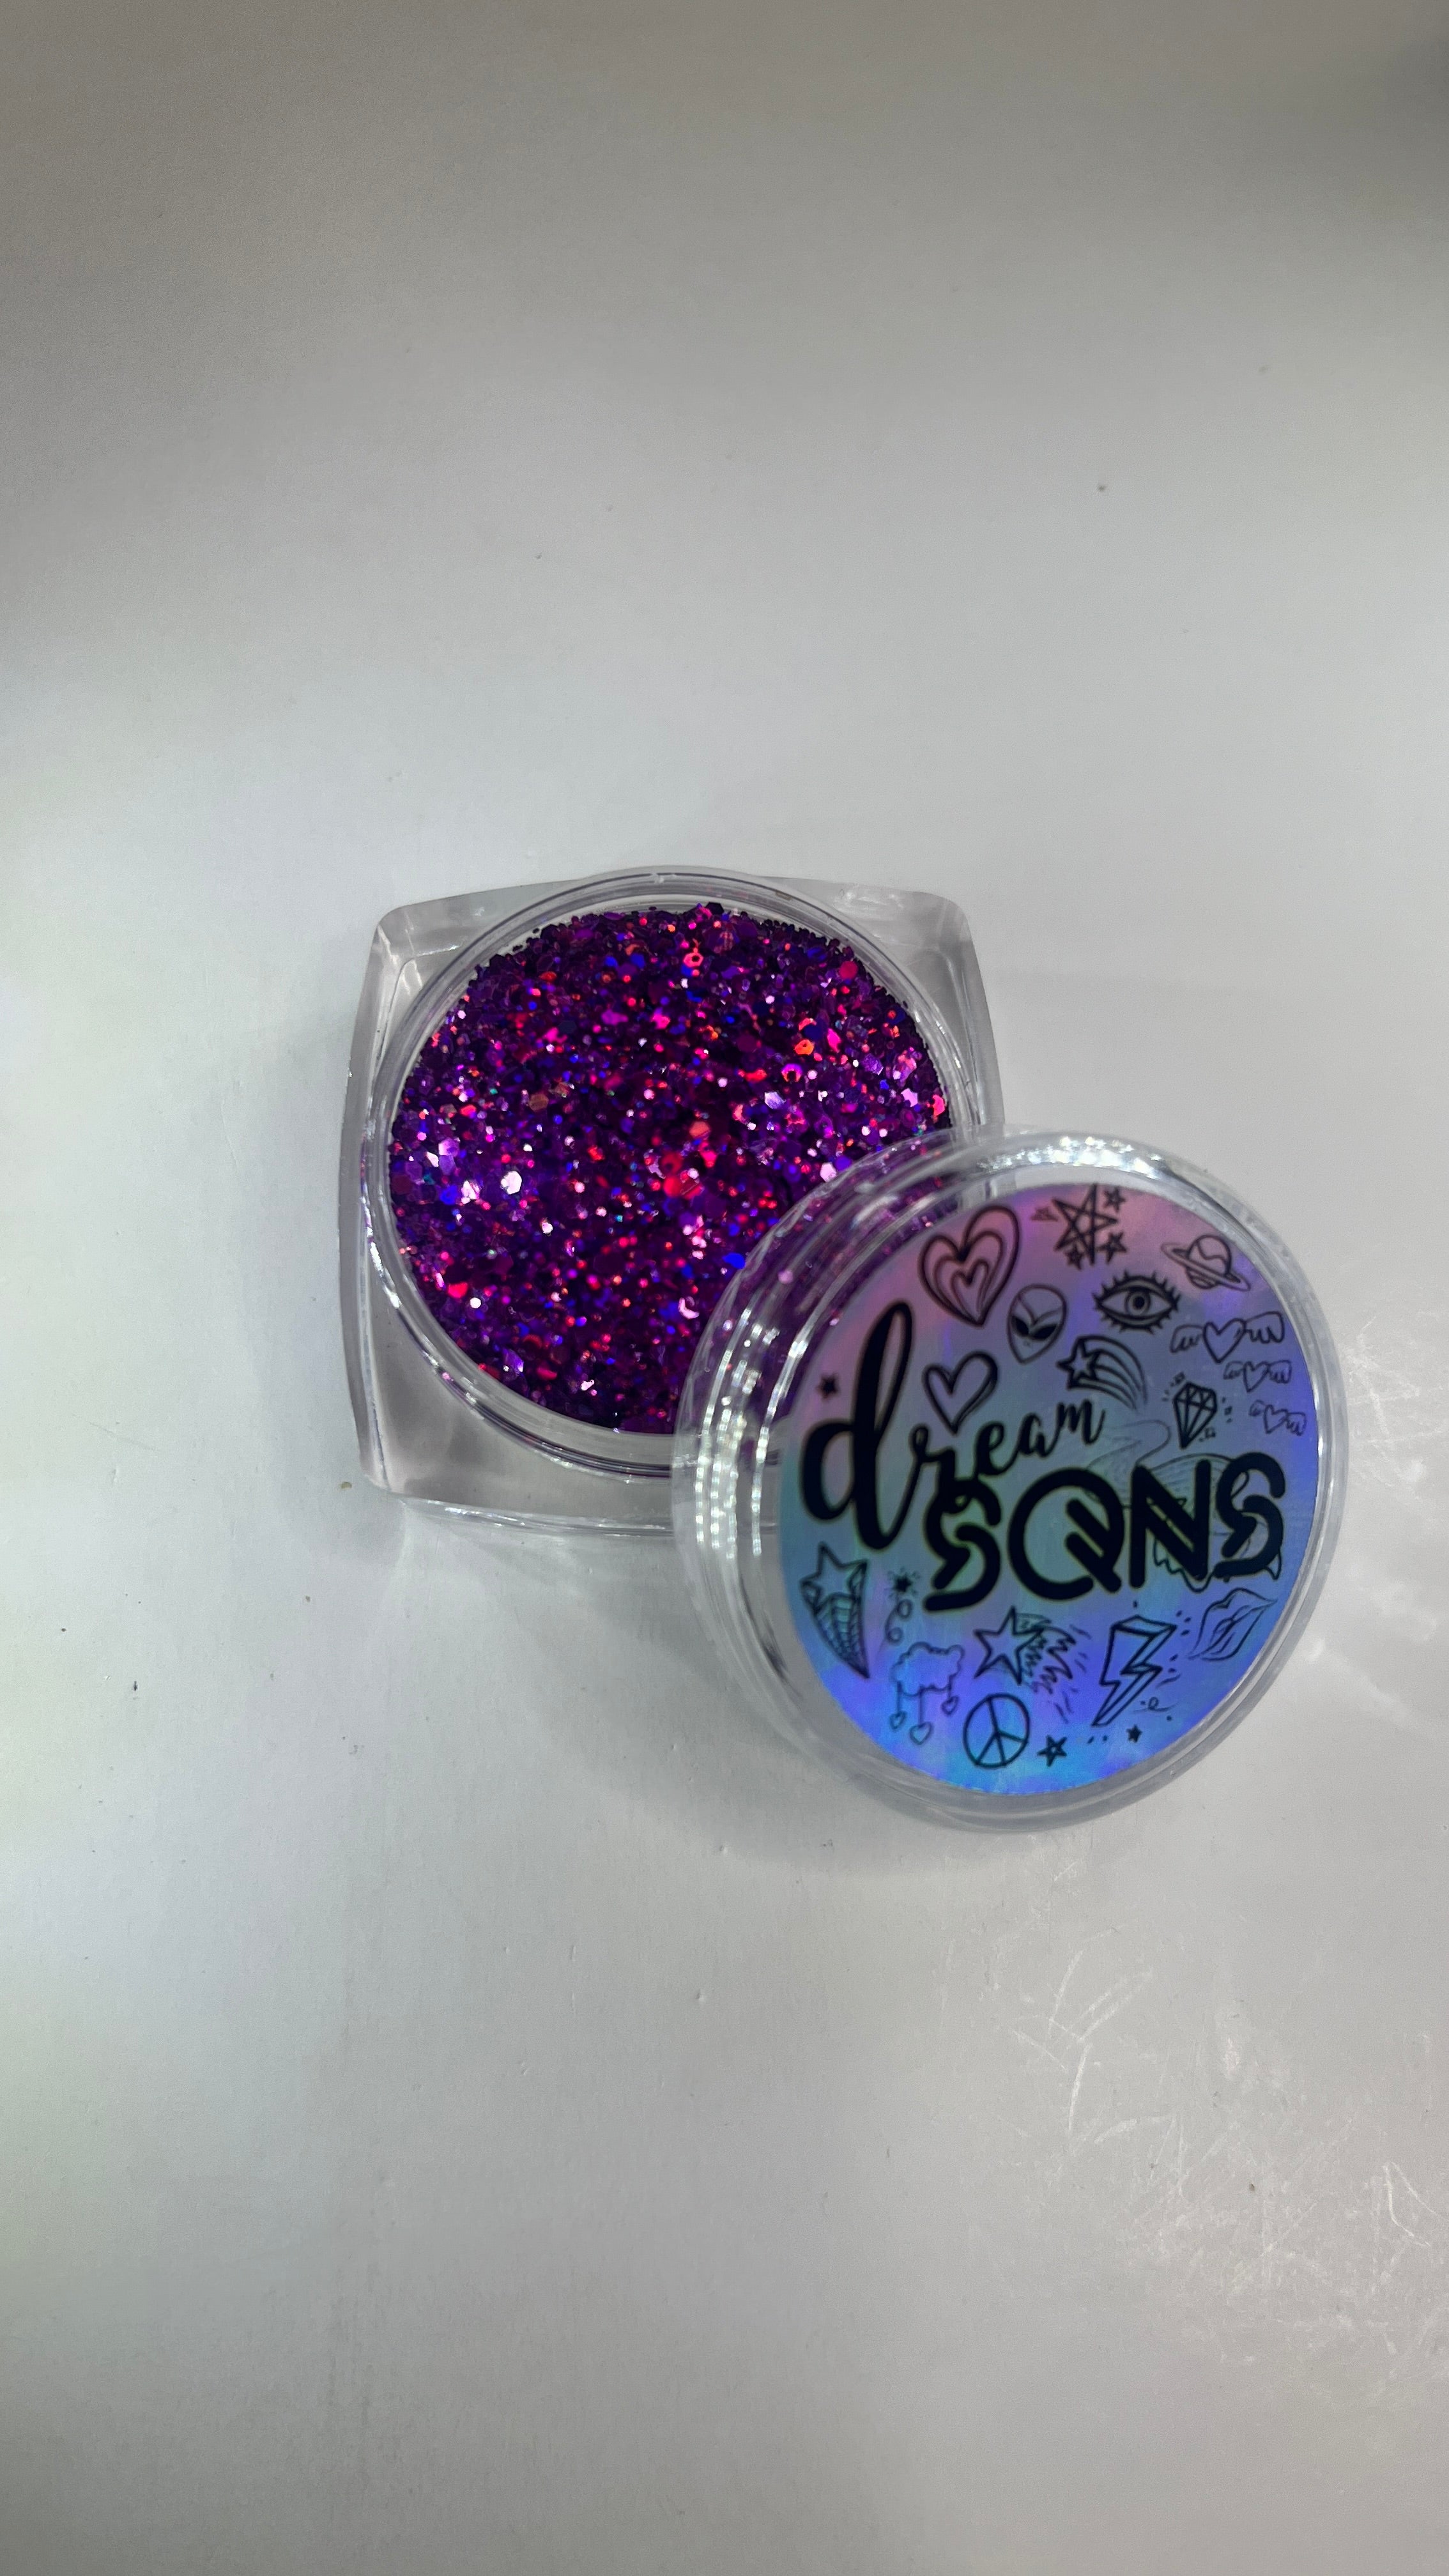 Top view of ‘Purple Rain’ Holographic Glitter by DreamSQNS in the component with lid